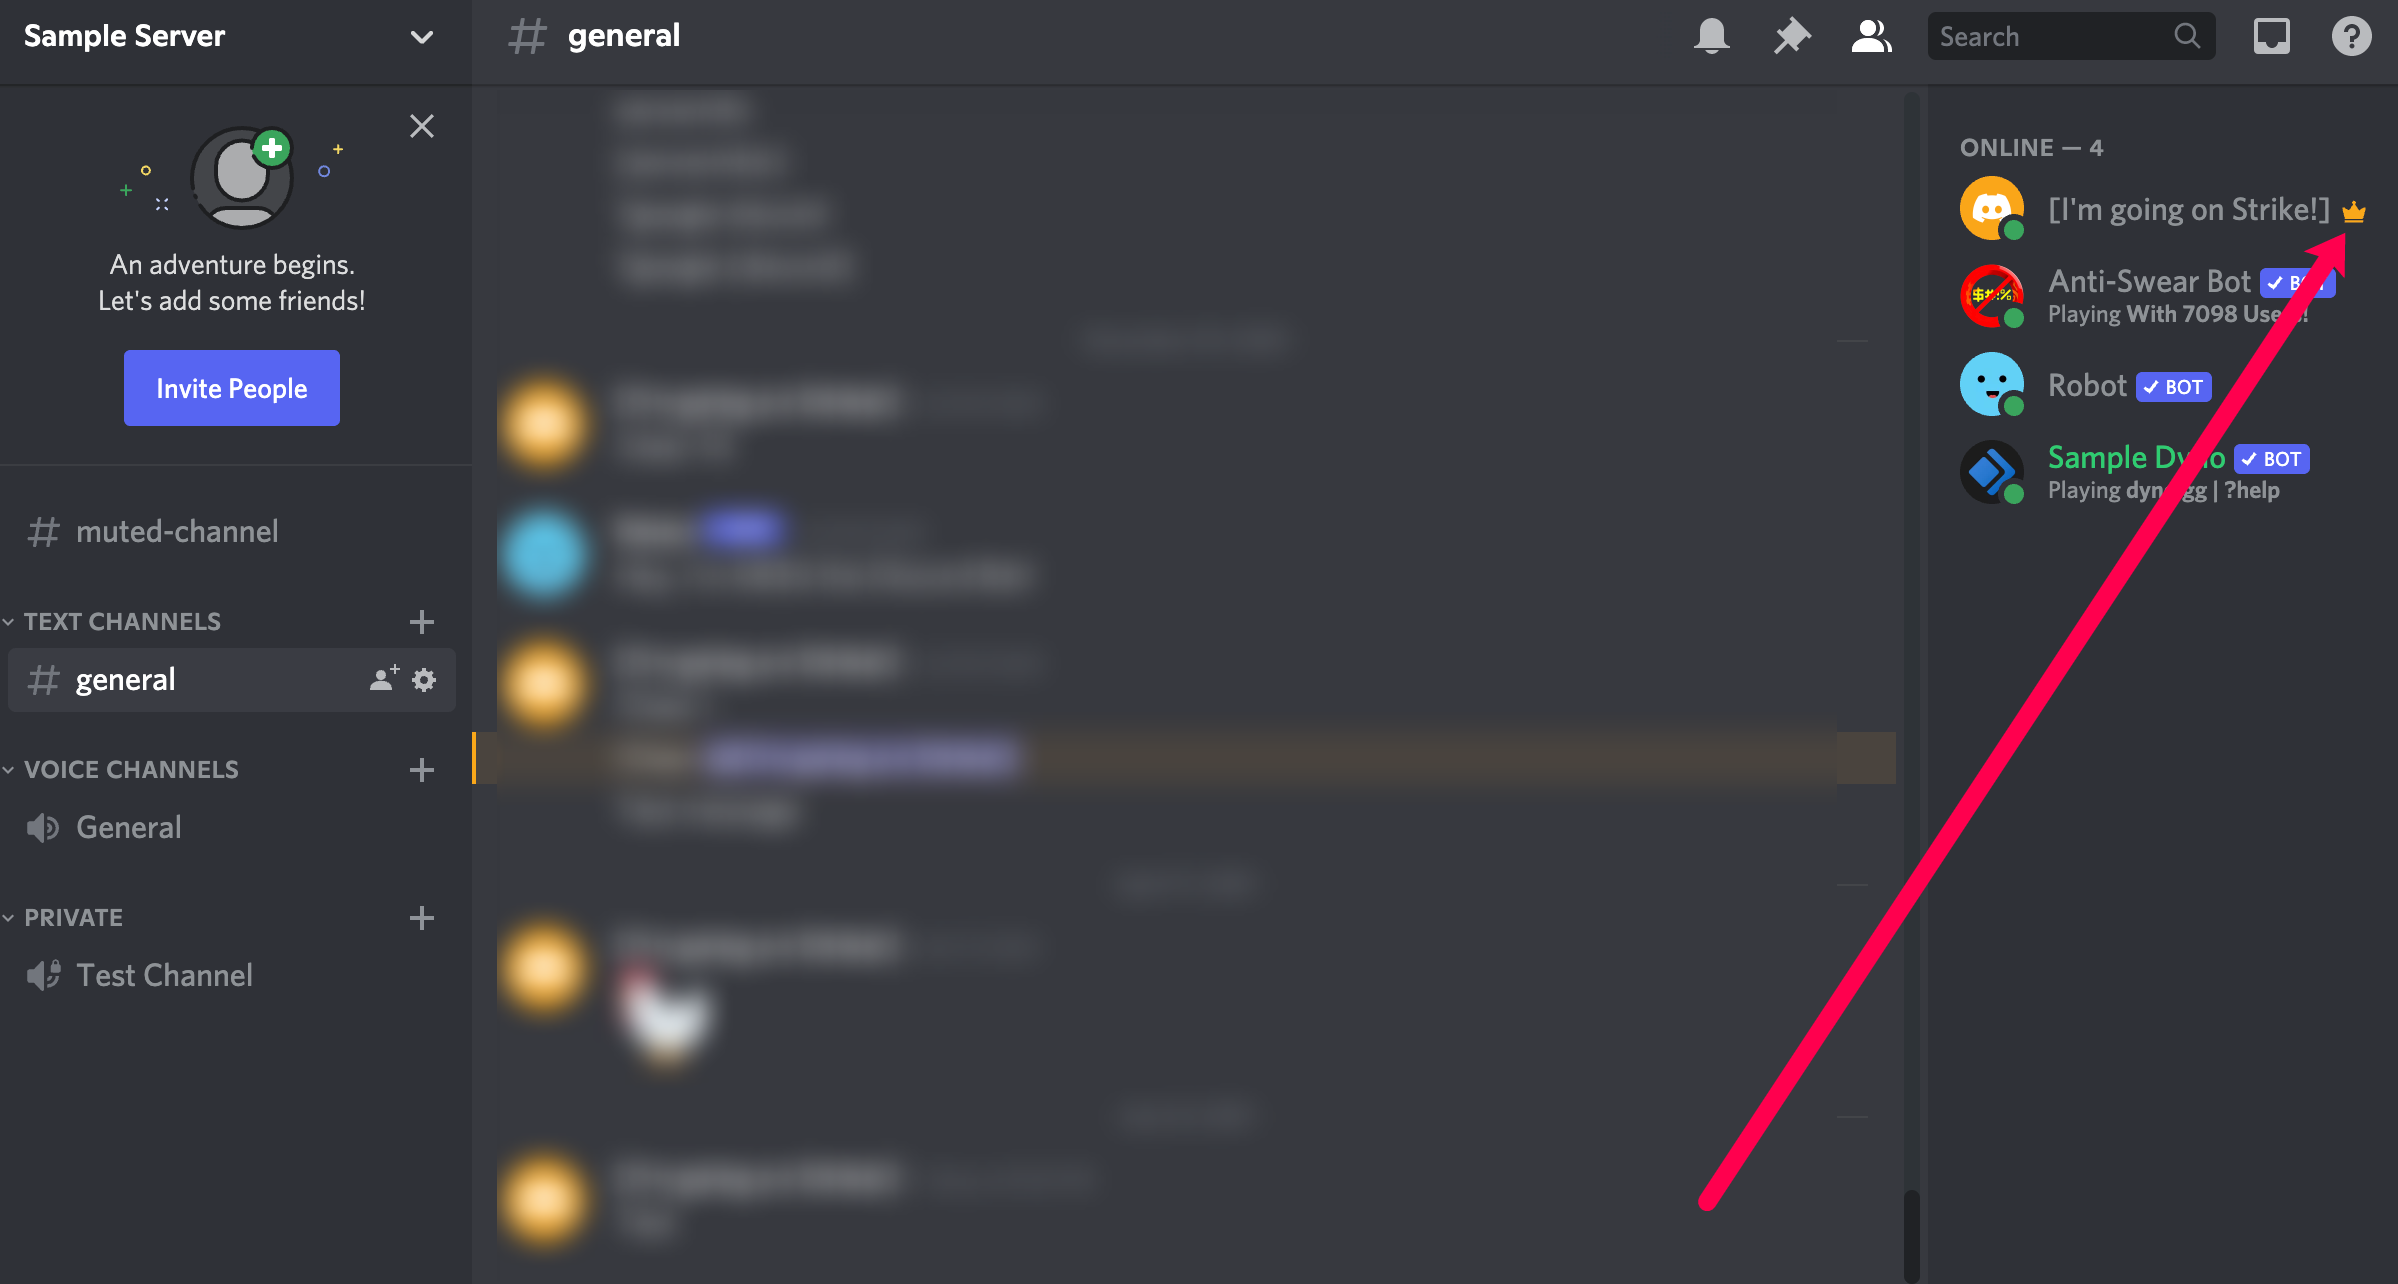 make discord role icon badges